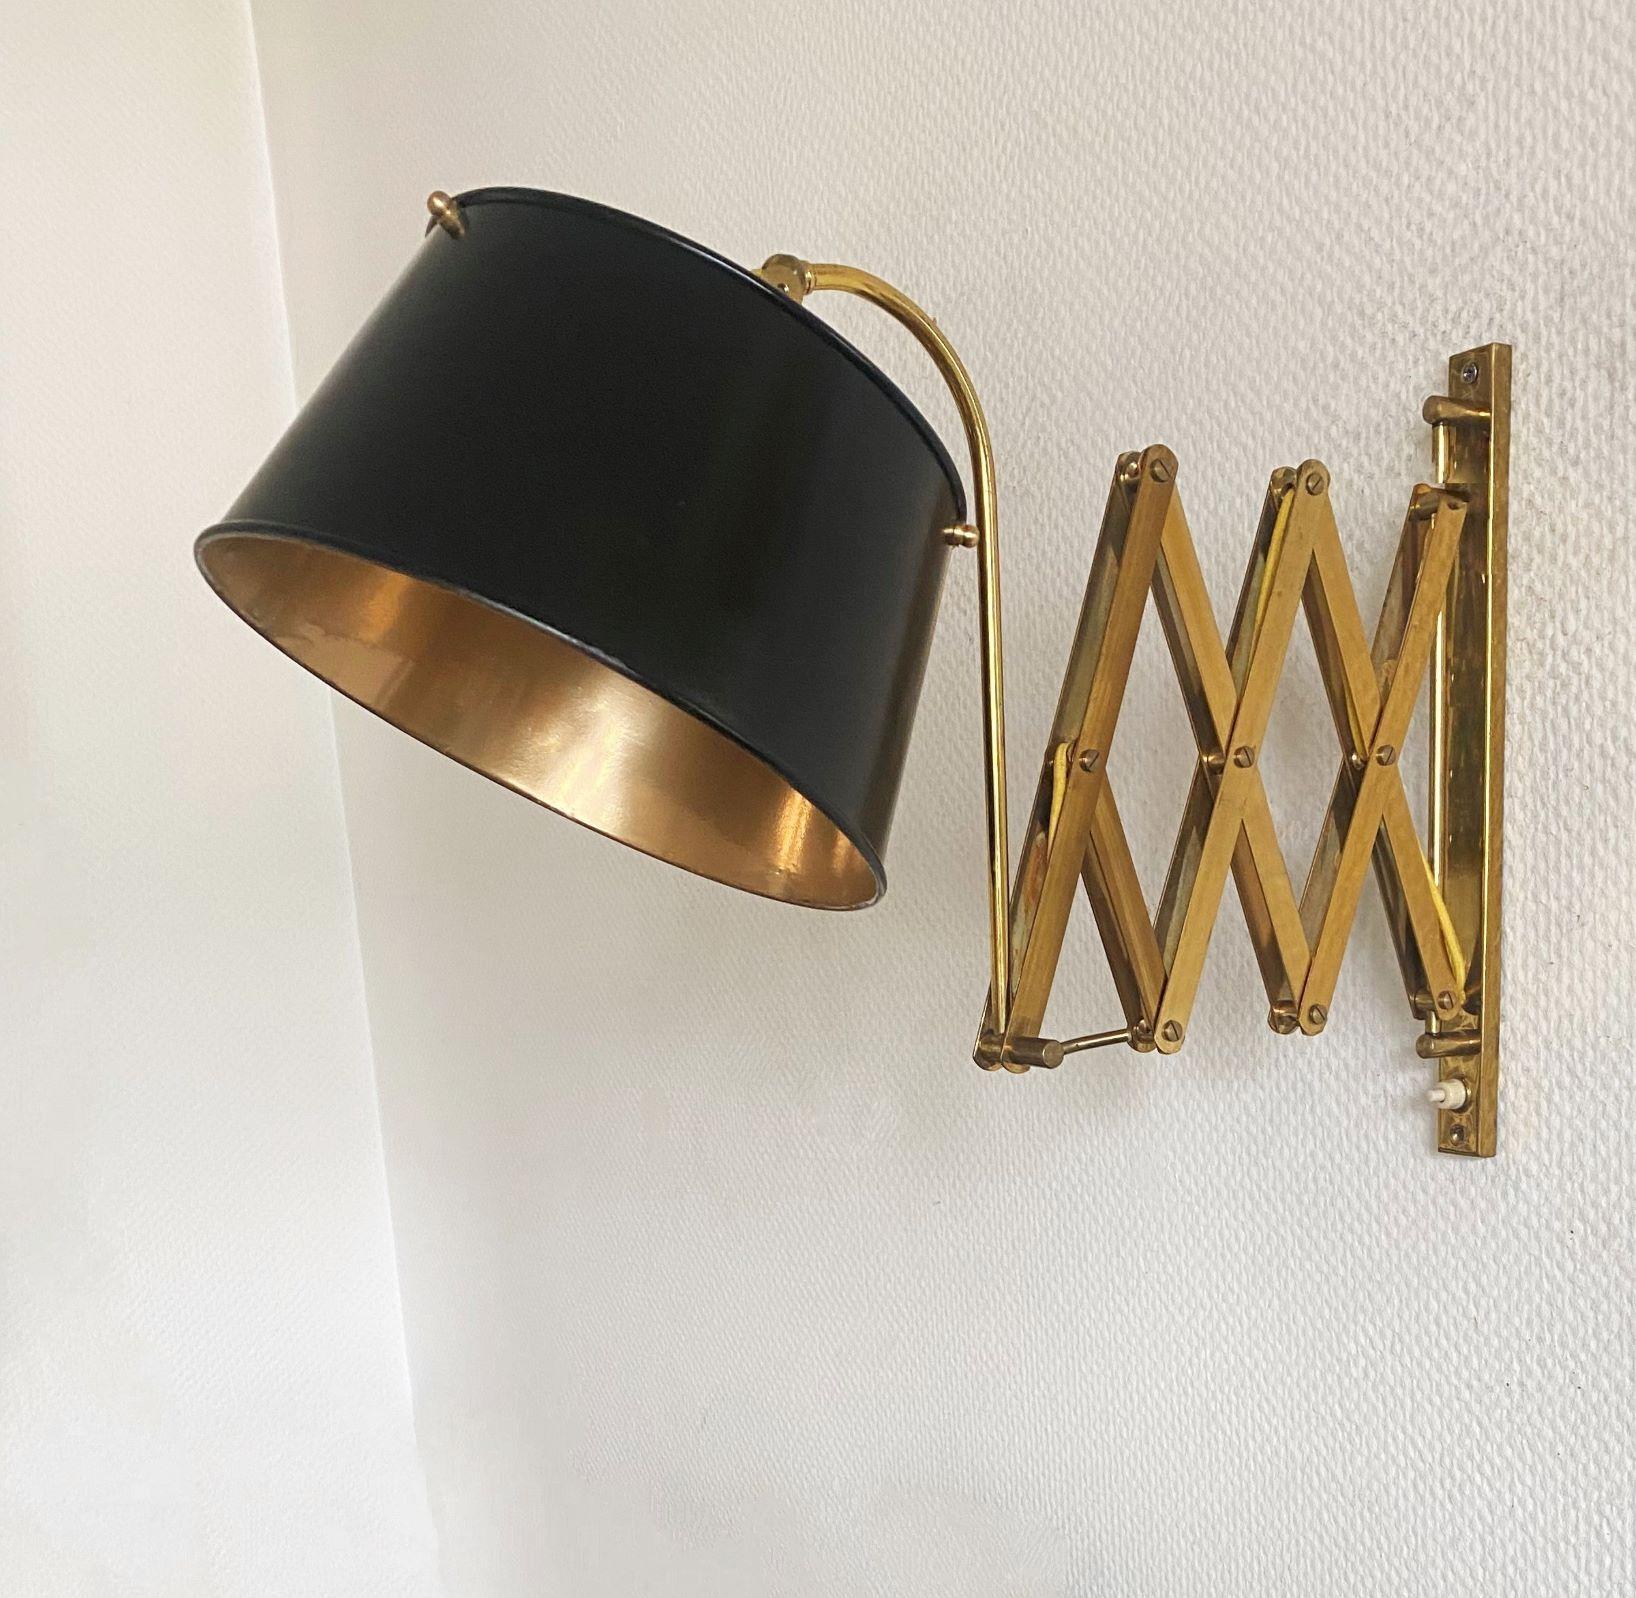 Mid-Century Modern Midcentury Italian Adjustable Brass Wall Sconce with Black Lacquered Metal Shade For Sale